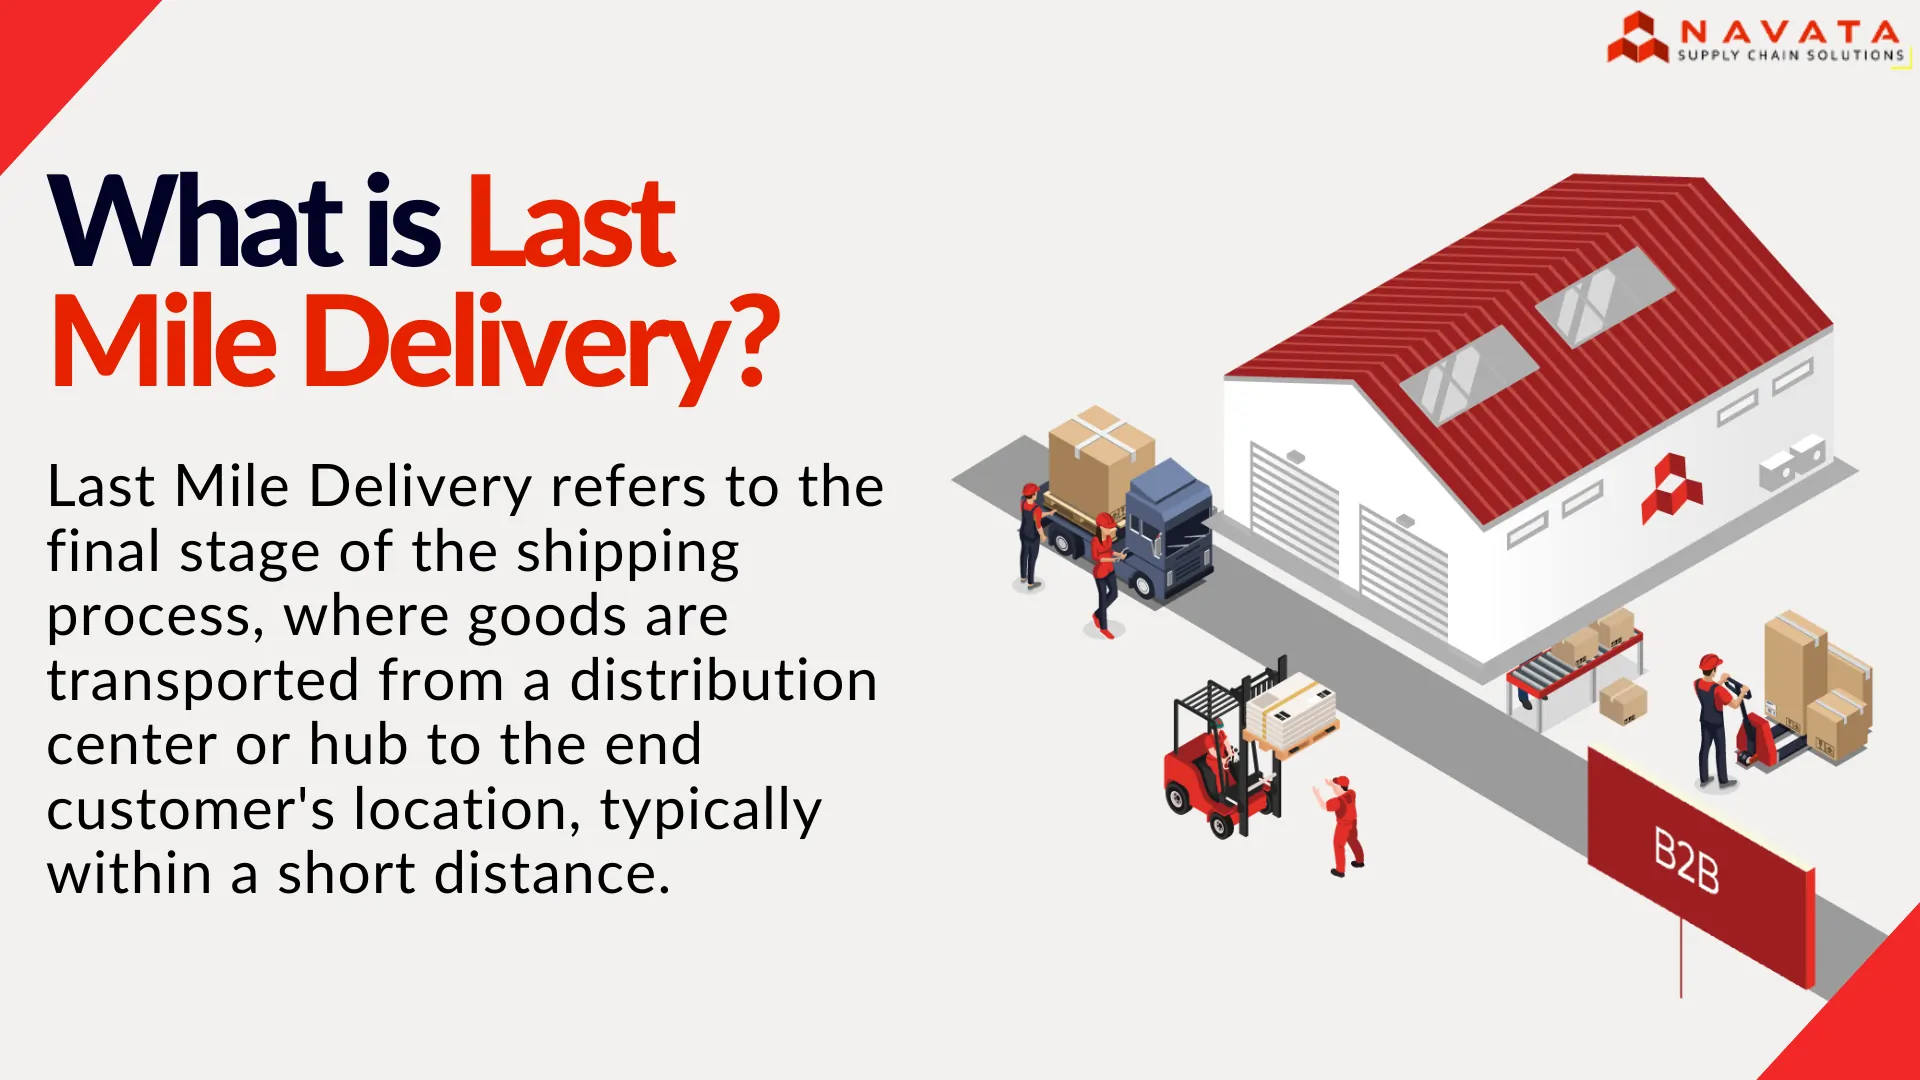 What is Last Mile Delivery